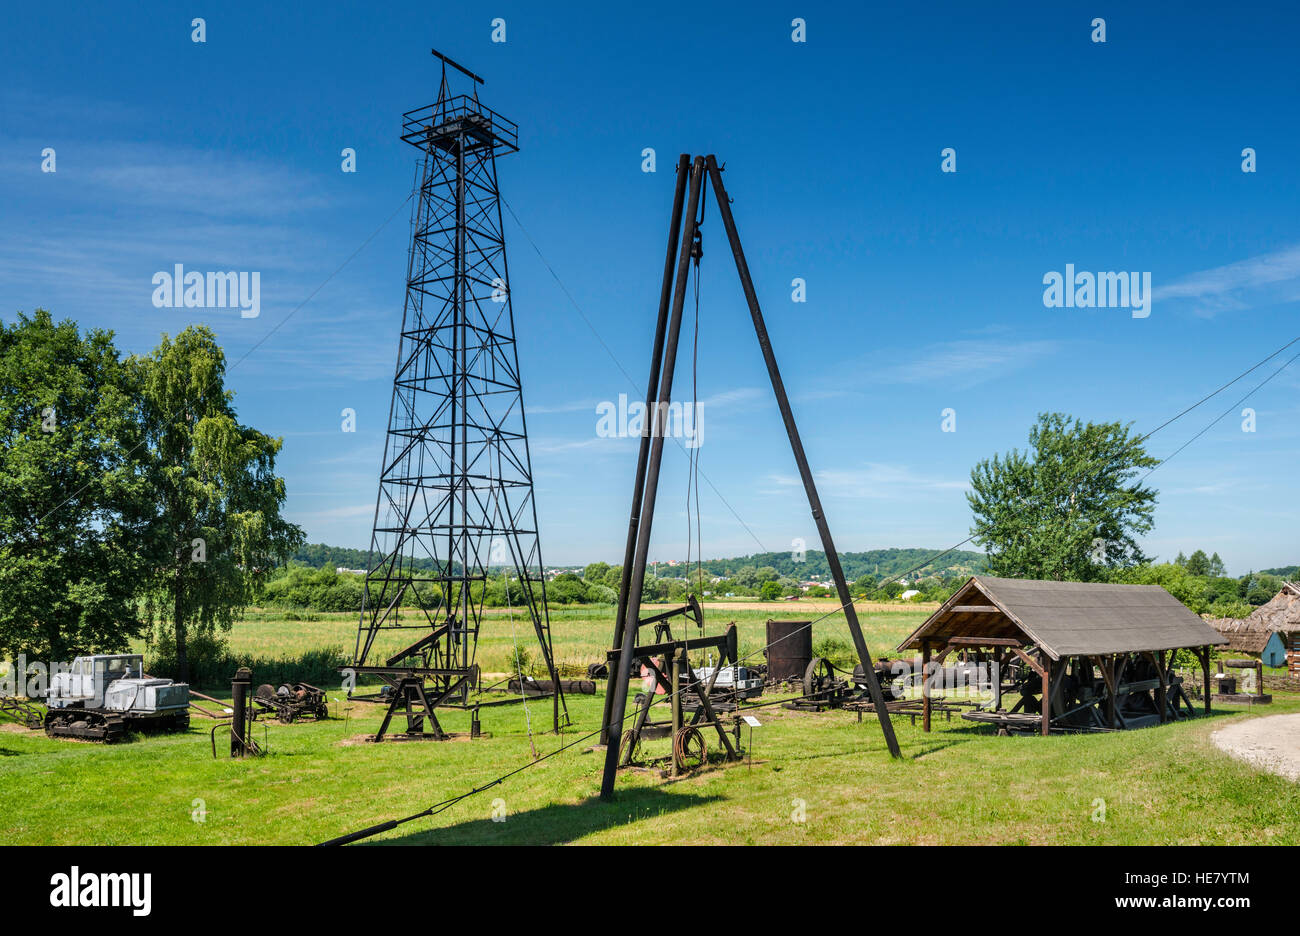 Oil drilling rigs used in Subcarpathian wells, oil industry exhibition at Rural Architecture Museum in Sanok, Malopolska, Poland Stock Photo